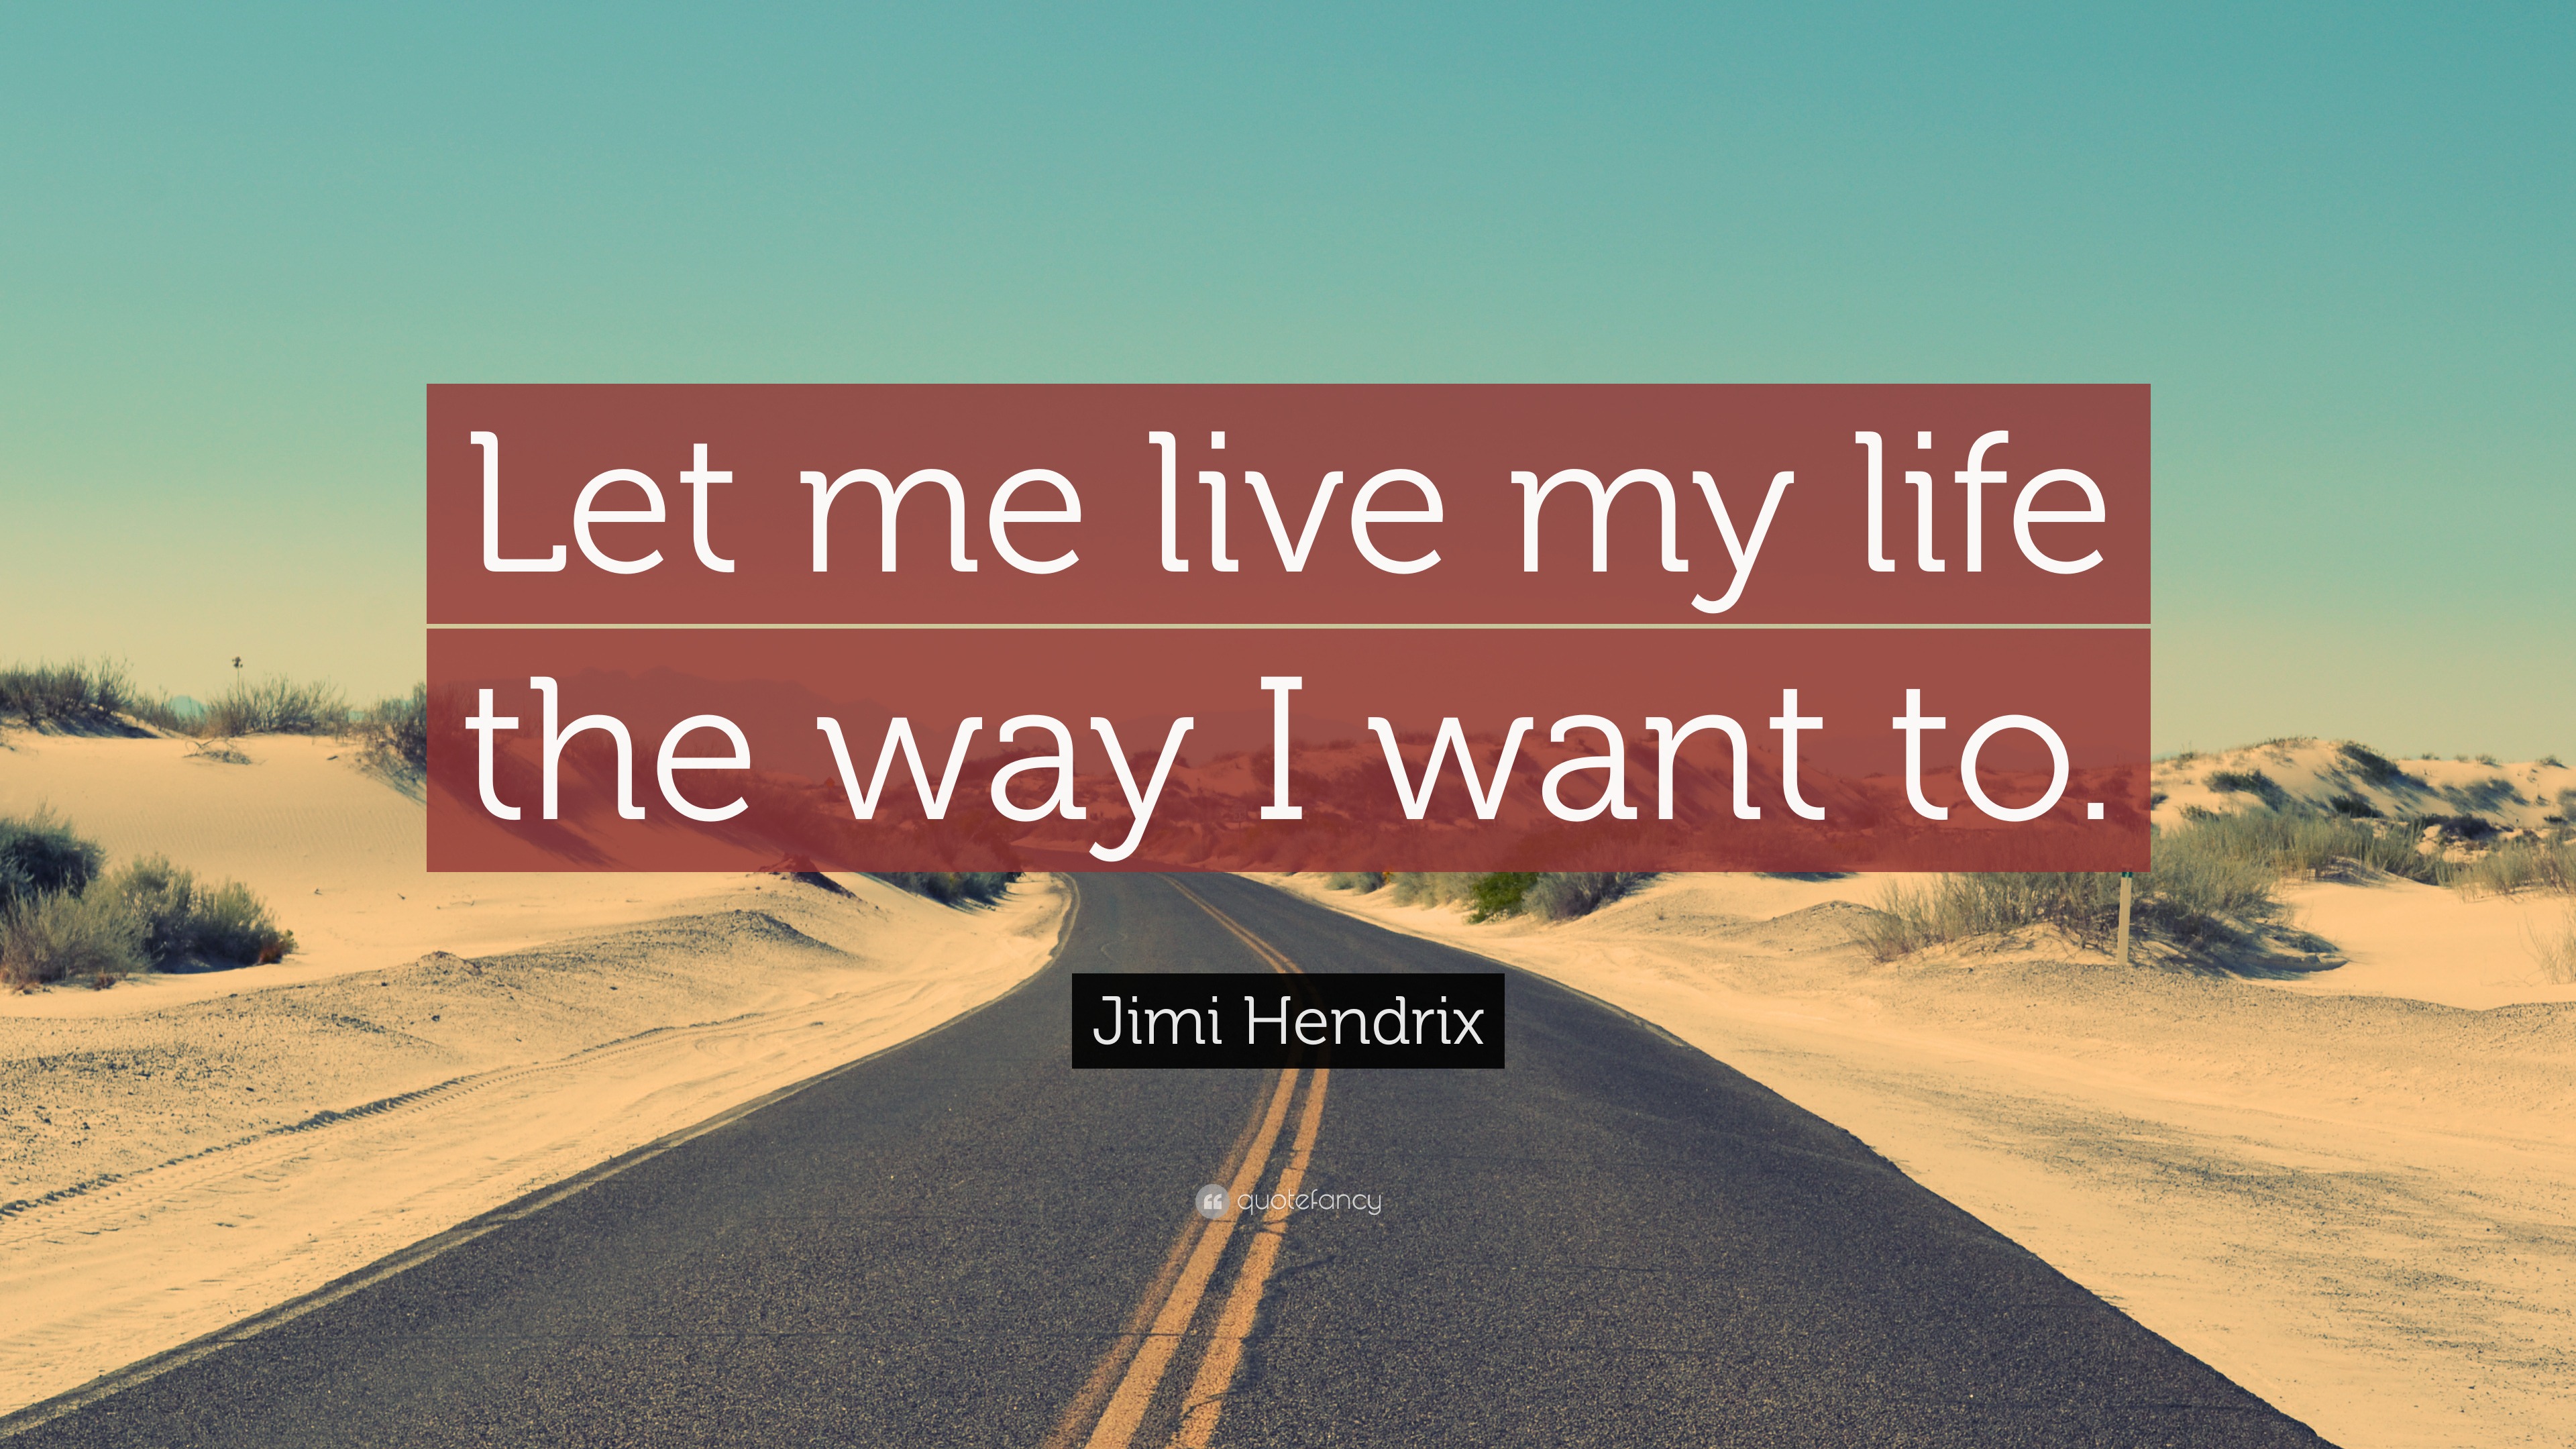 2241513 Jimi Hendrix Quote Let me live my life the way I want to